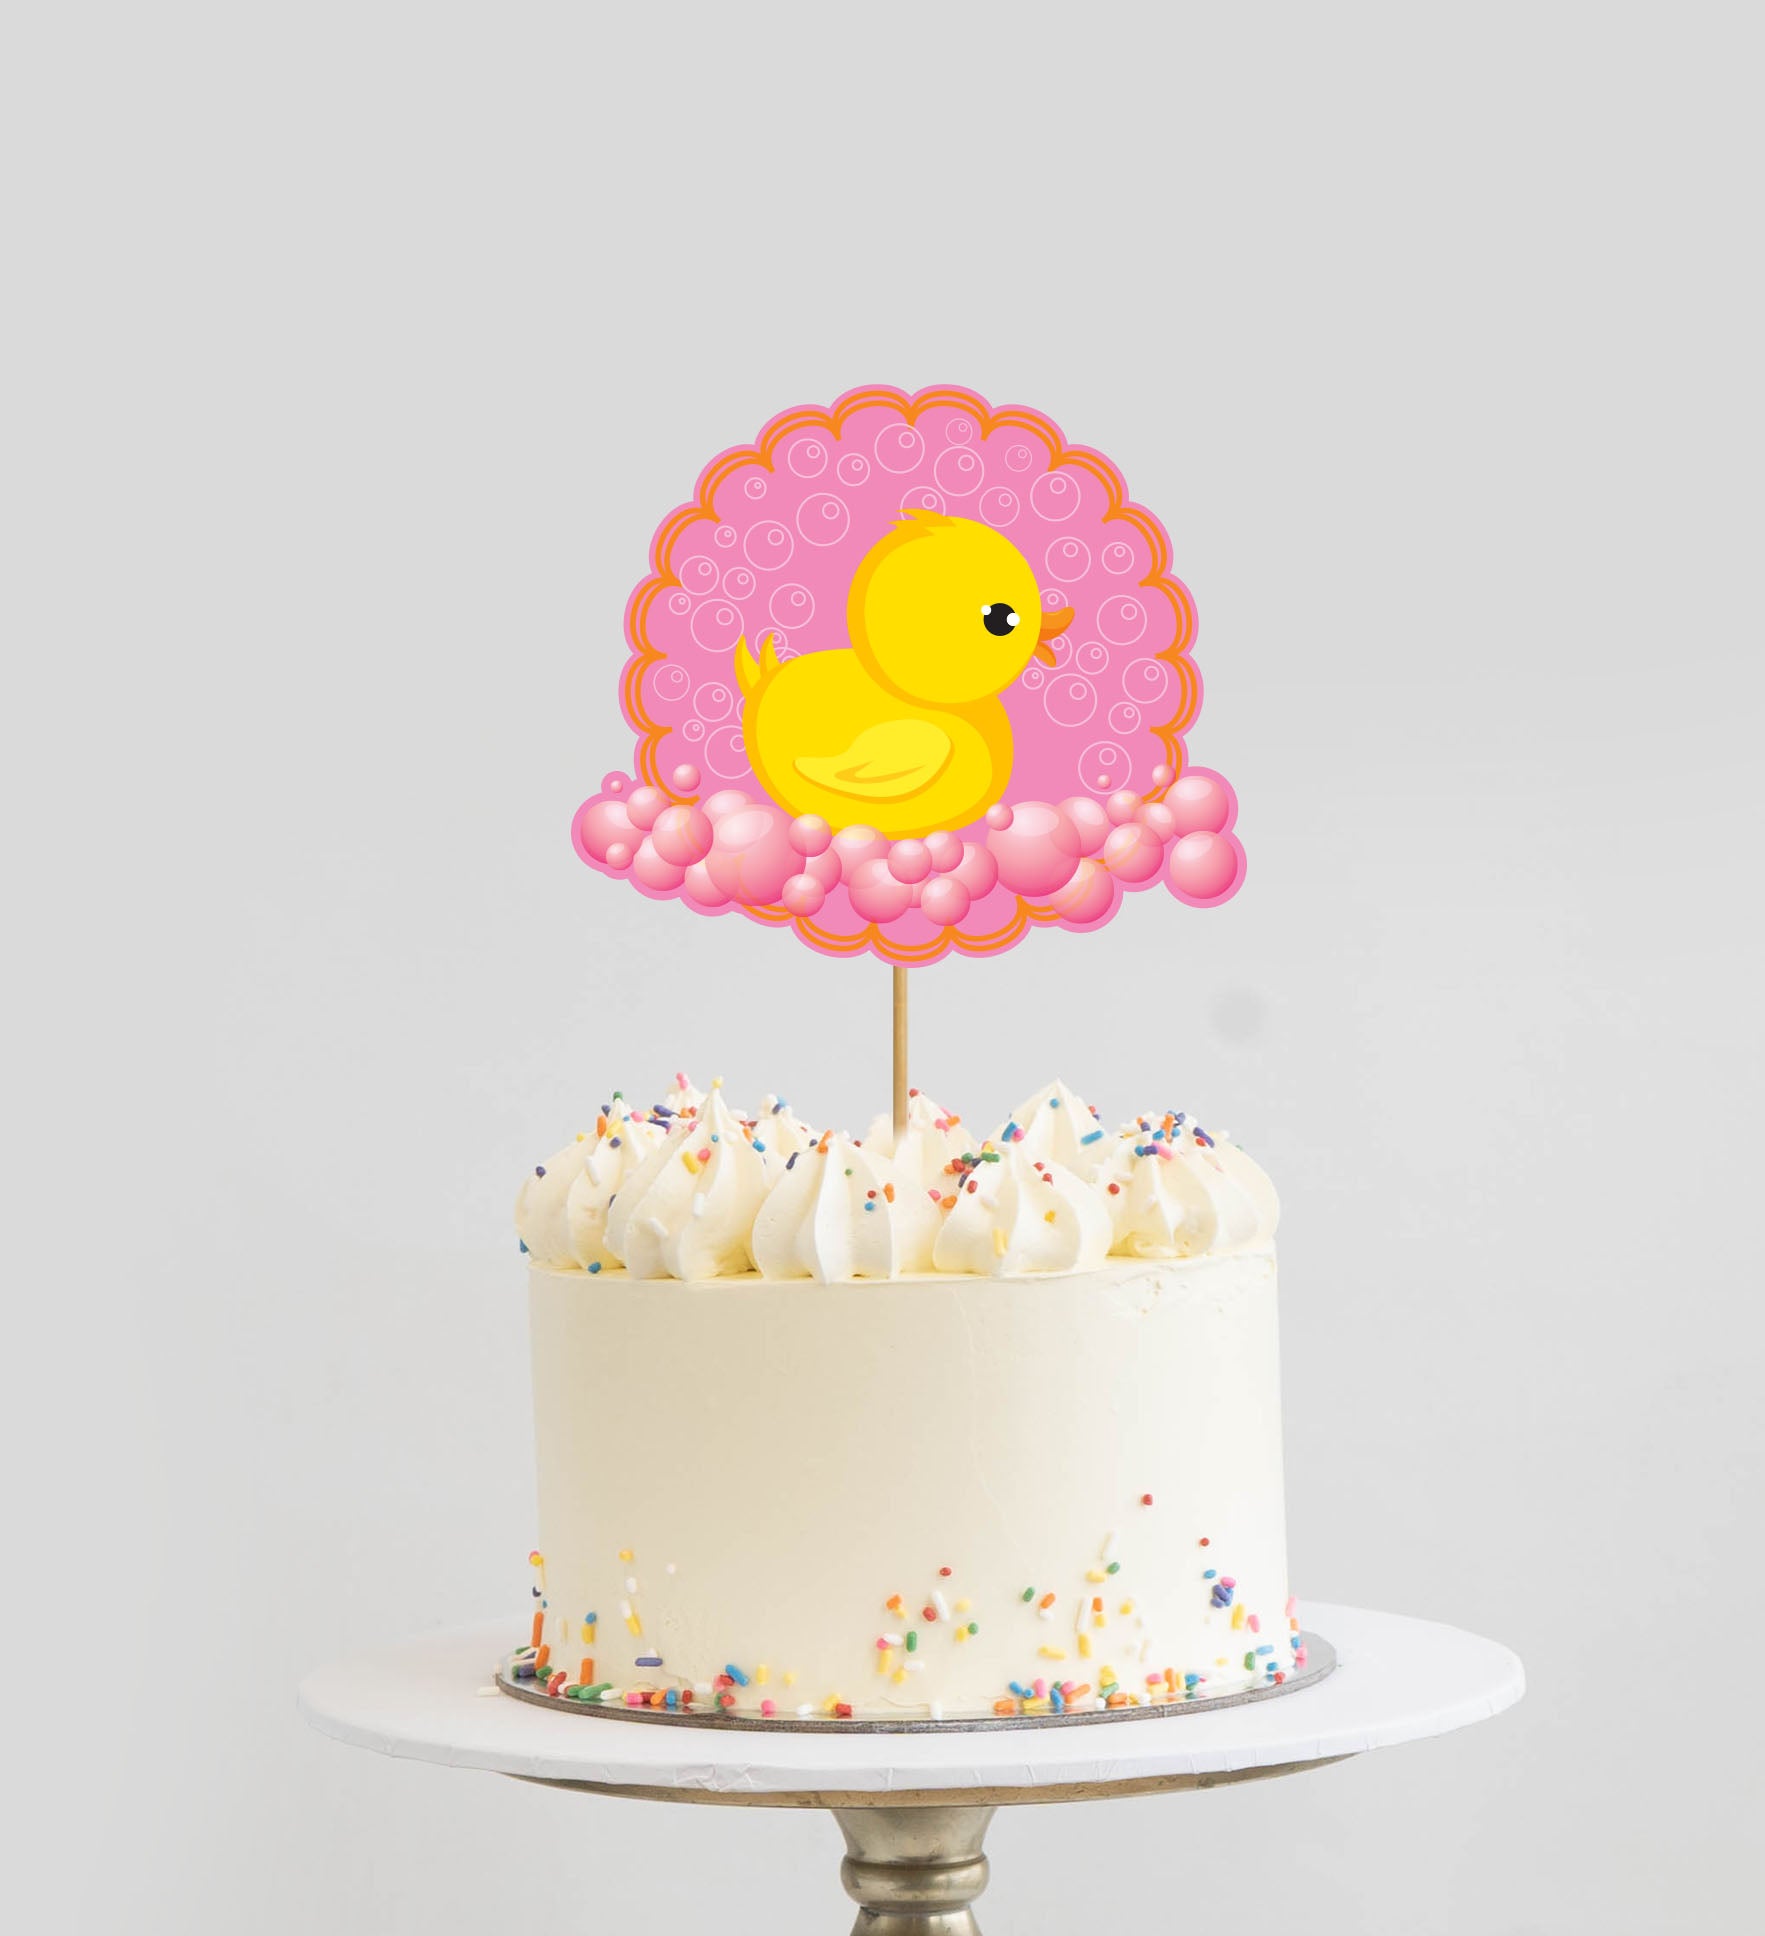 Duck Cake - Bakers Talent - Exotic Desserts, Customized Cakes, Macarons,  Cupcakes